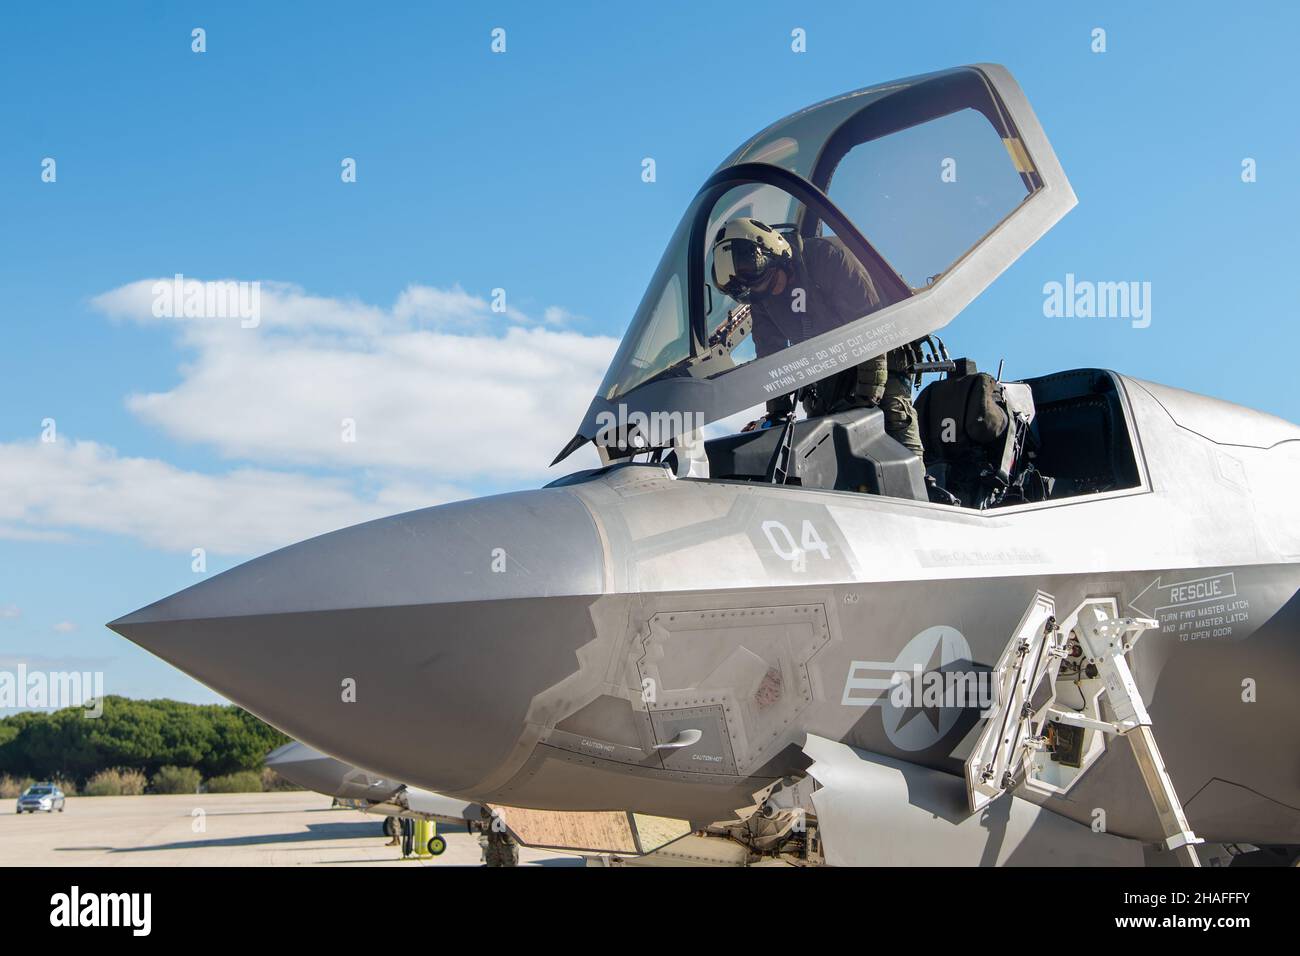 NAVAL STATION ROTA, Spain (November 30, 2021)- Marine Capt. Daniel Lengyel boards an F-35A Lightning II aircraft, assigned to Marine Fighter Attack Squadron (VMFA) 211, Naval Station (NAVSTA) Rota on Nov. 30, 2021. VMFA 211 are conducting pre-flight checks on NAVSTA Rota, Spain, before leaving to participate in exercises with Spanish and British Aircrafts. (U.S. Navy photo by Mass Communication Specialist 2nd Class Jacob Owen.) Stock Photo